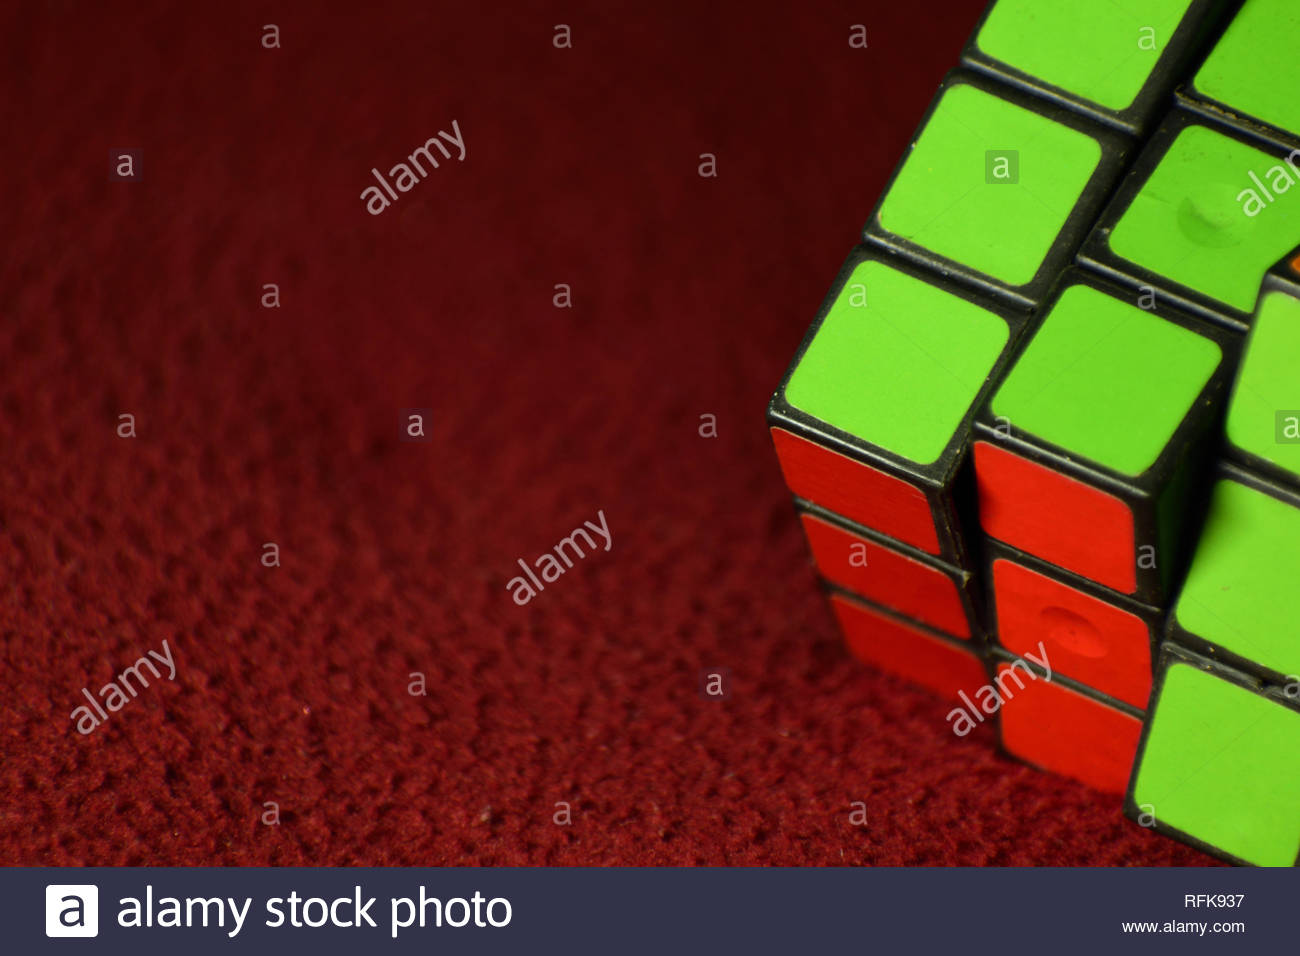 Rubik S Cube On A Red Background Stock Photo